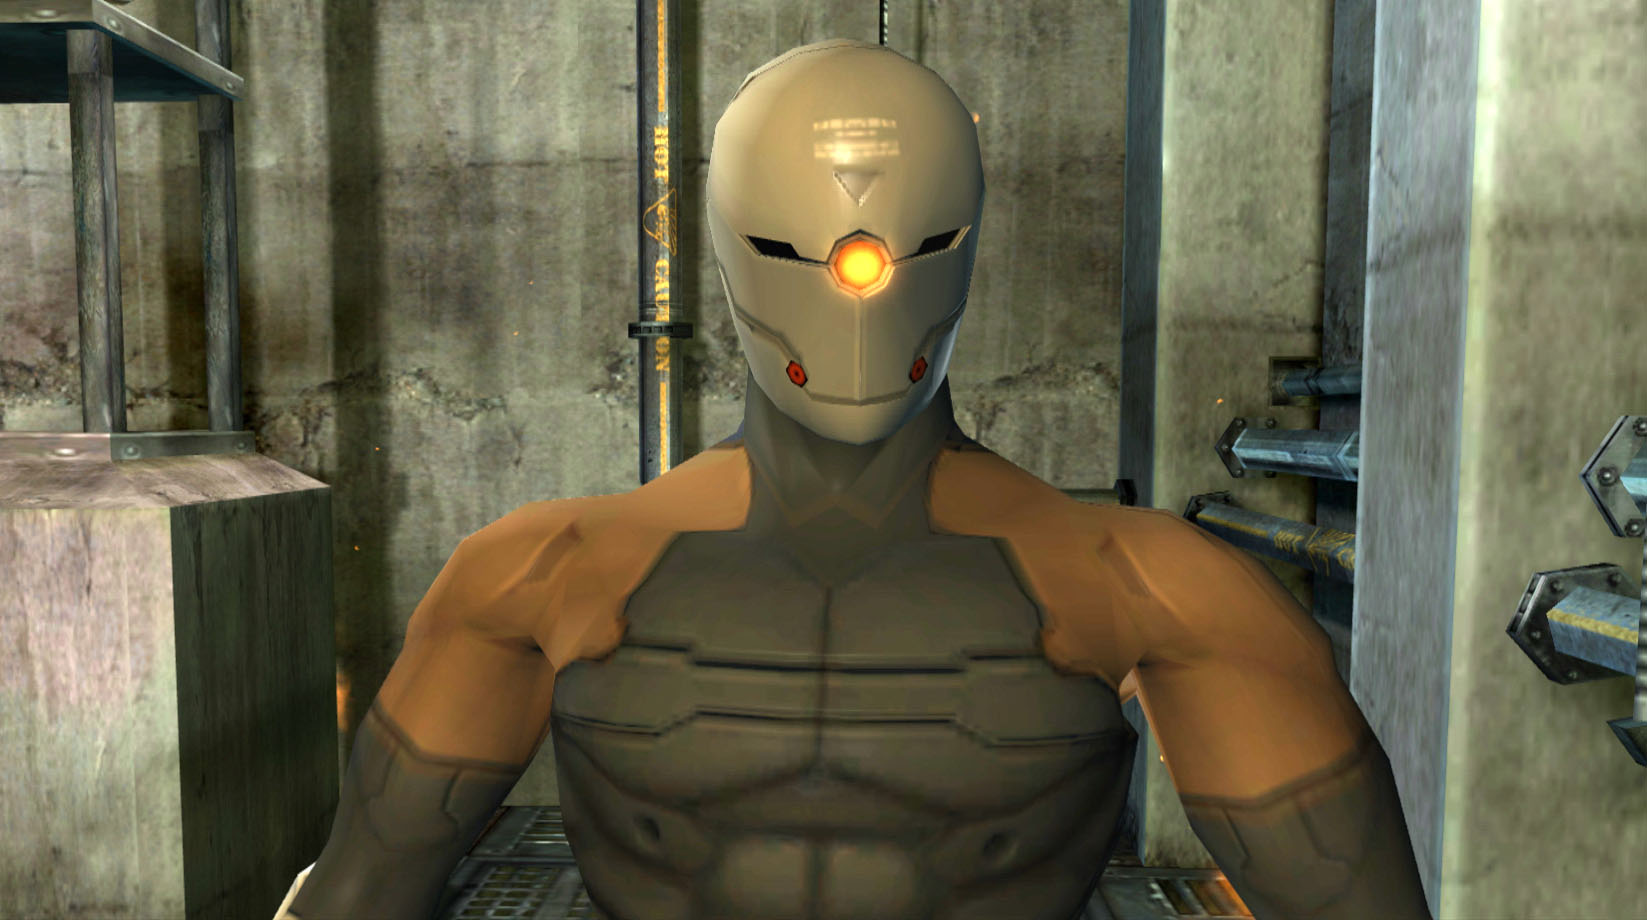 Gray Fox from the Metal Gear Solid Series